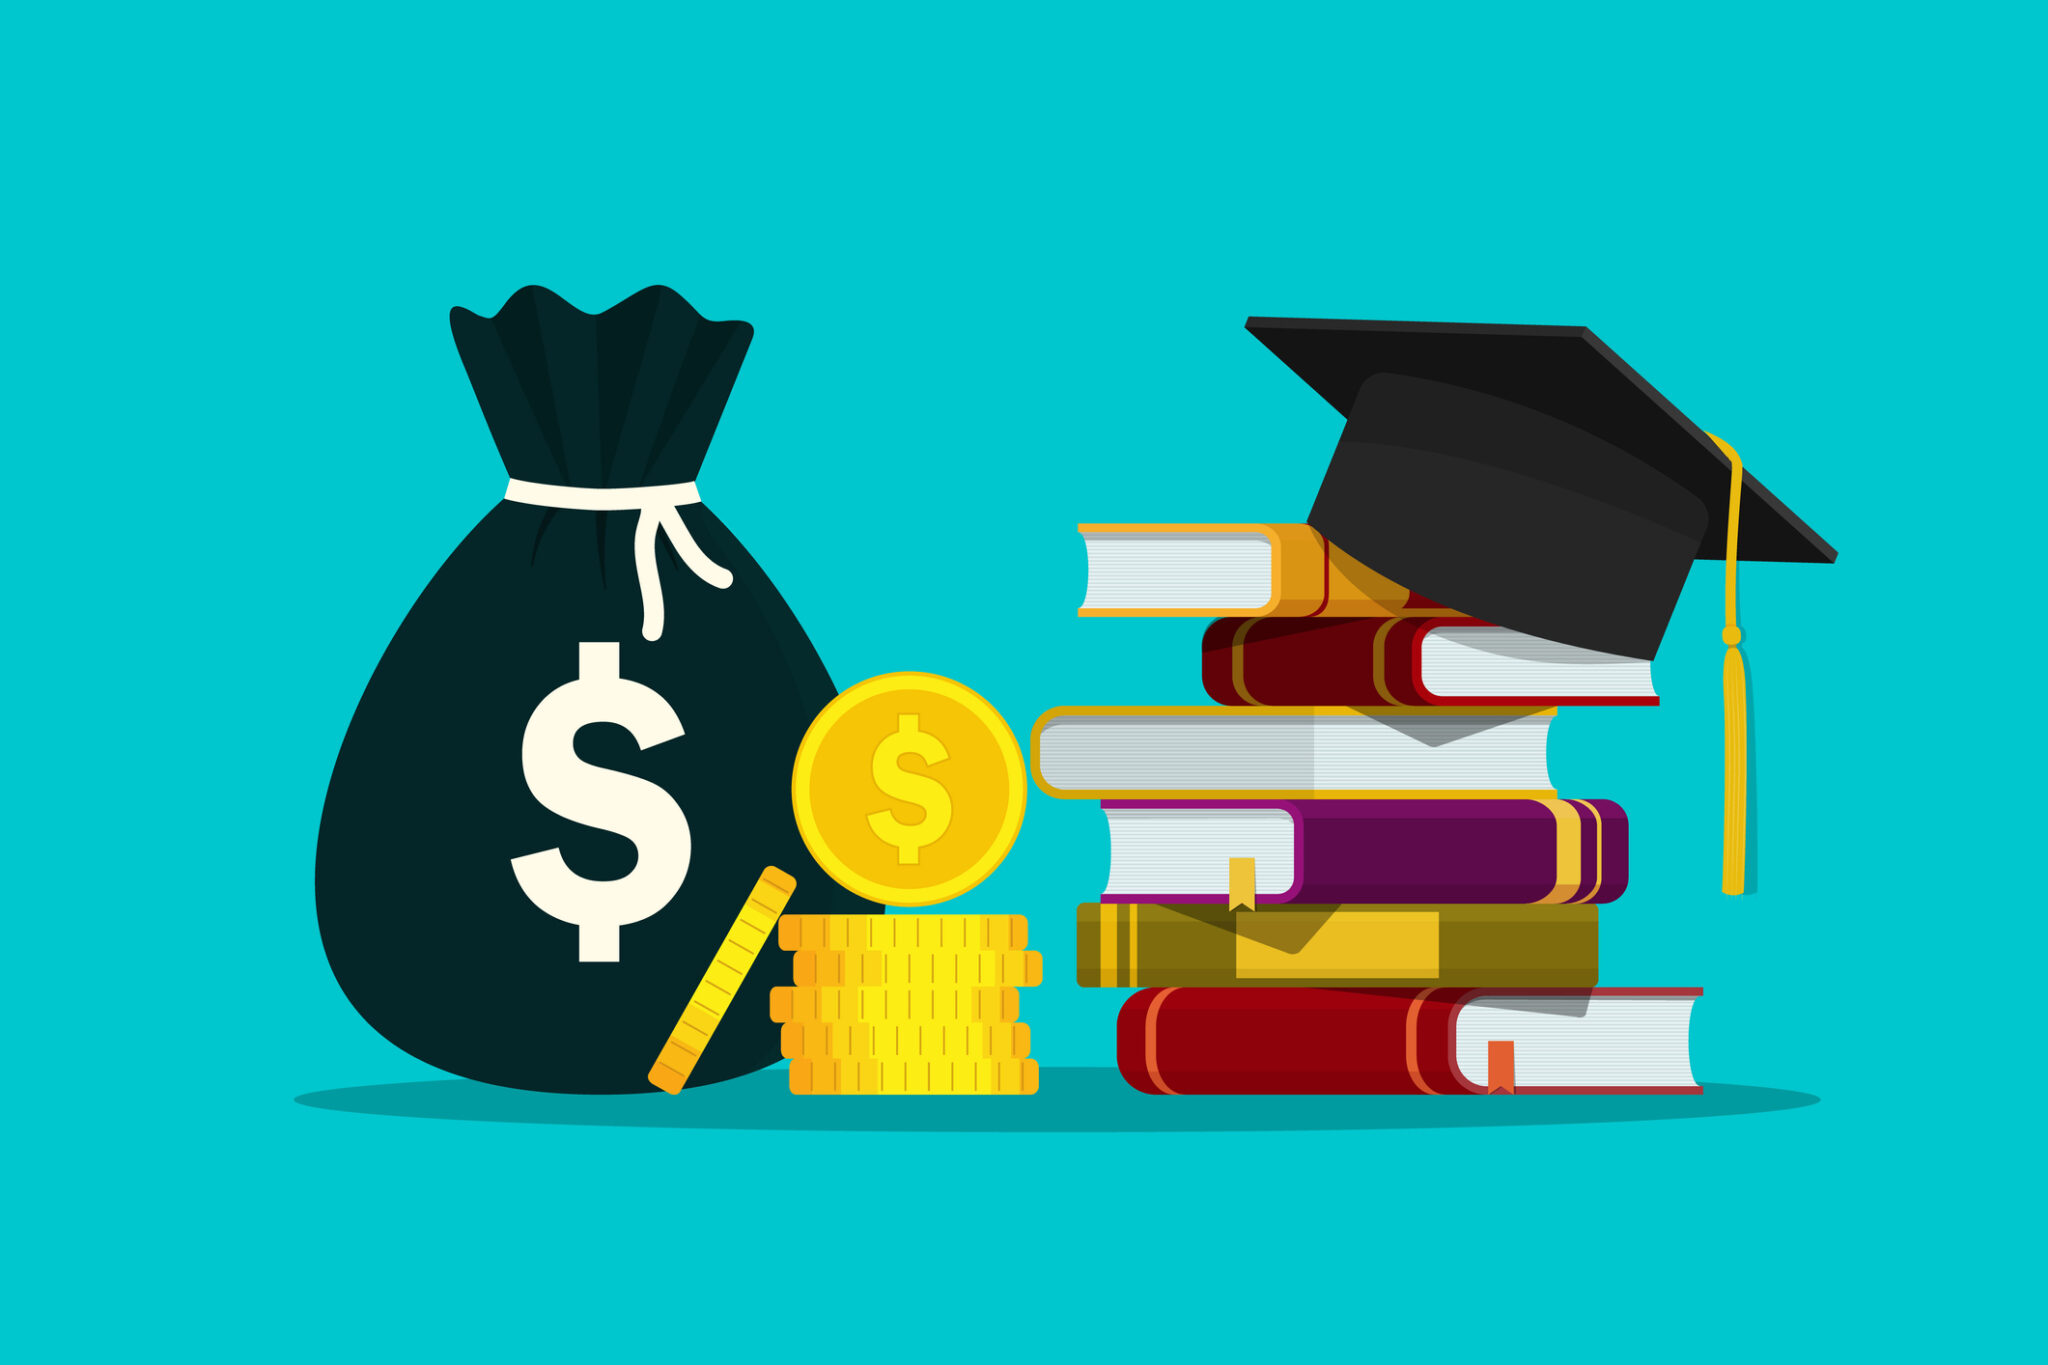 An illustration of a bag of money and gold coins beside a pile of books topped with a graduation cap.